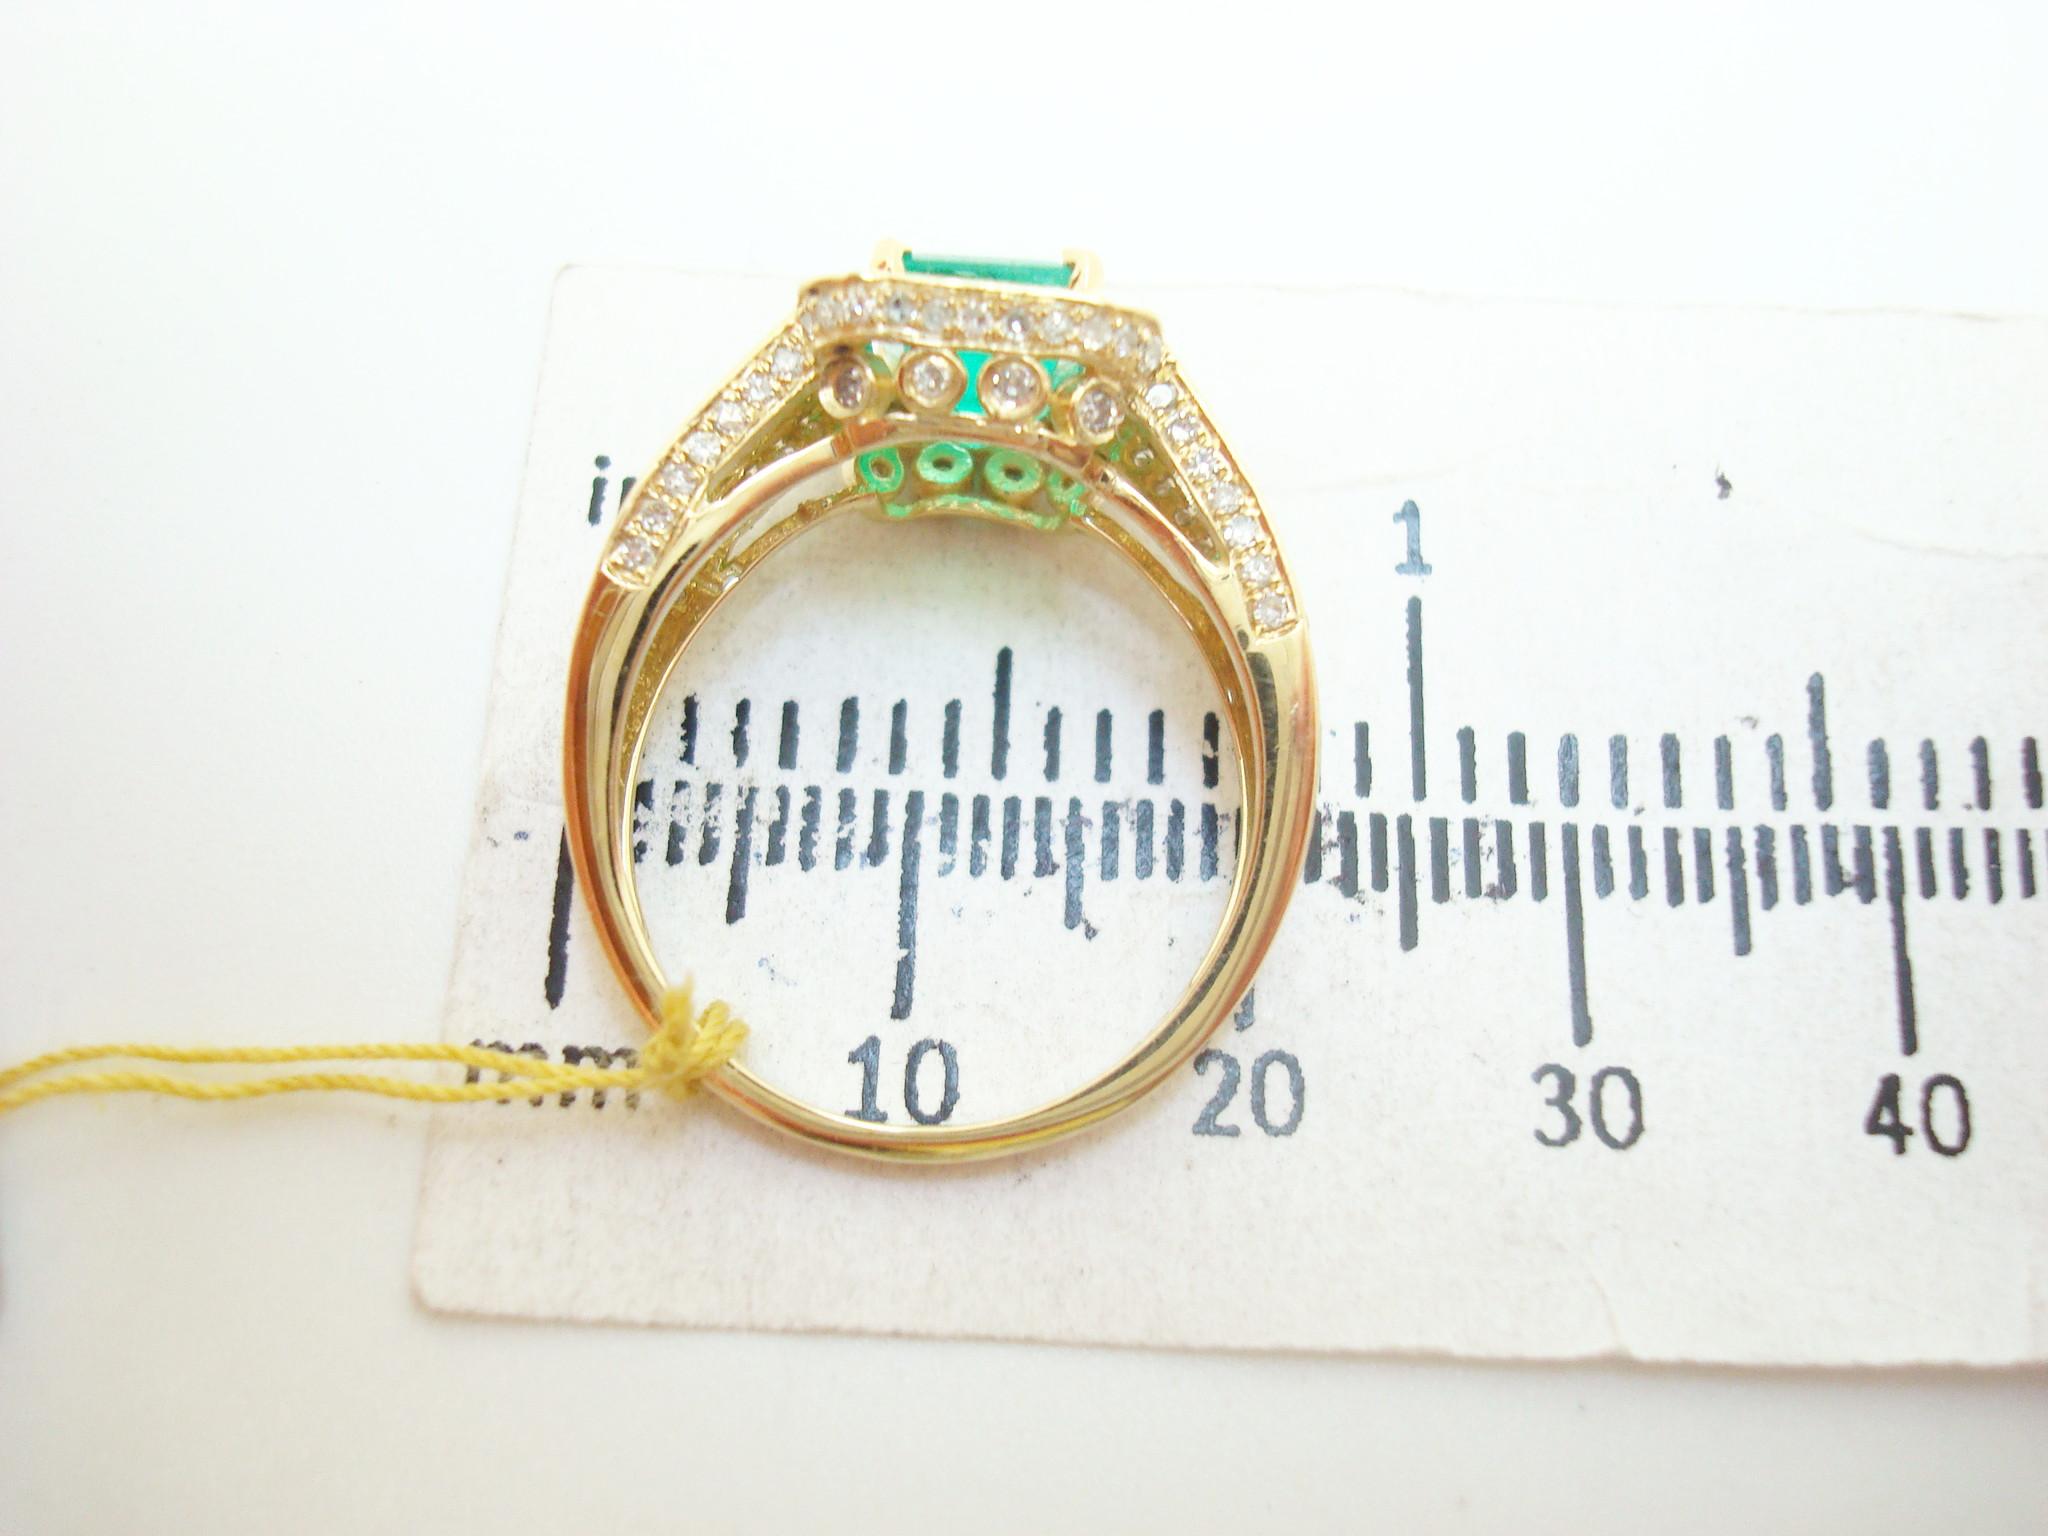 10k Gold 1.62ct Genuine Natural Emerald Ring with 1/4ct Diamonds '#J2604' For Sale 4